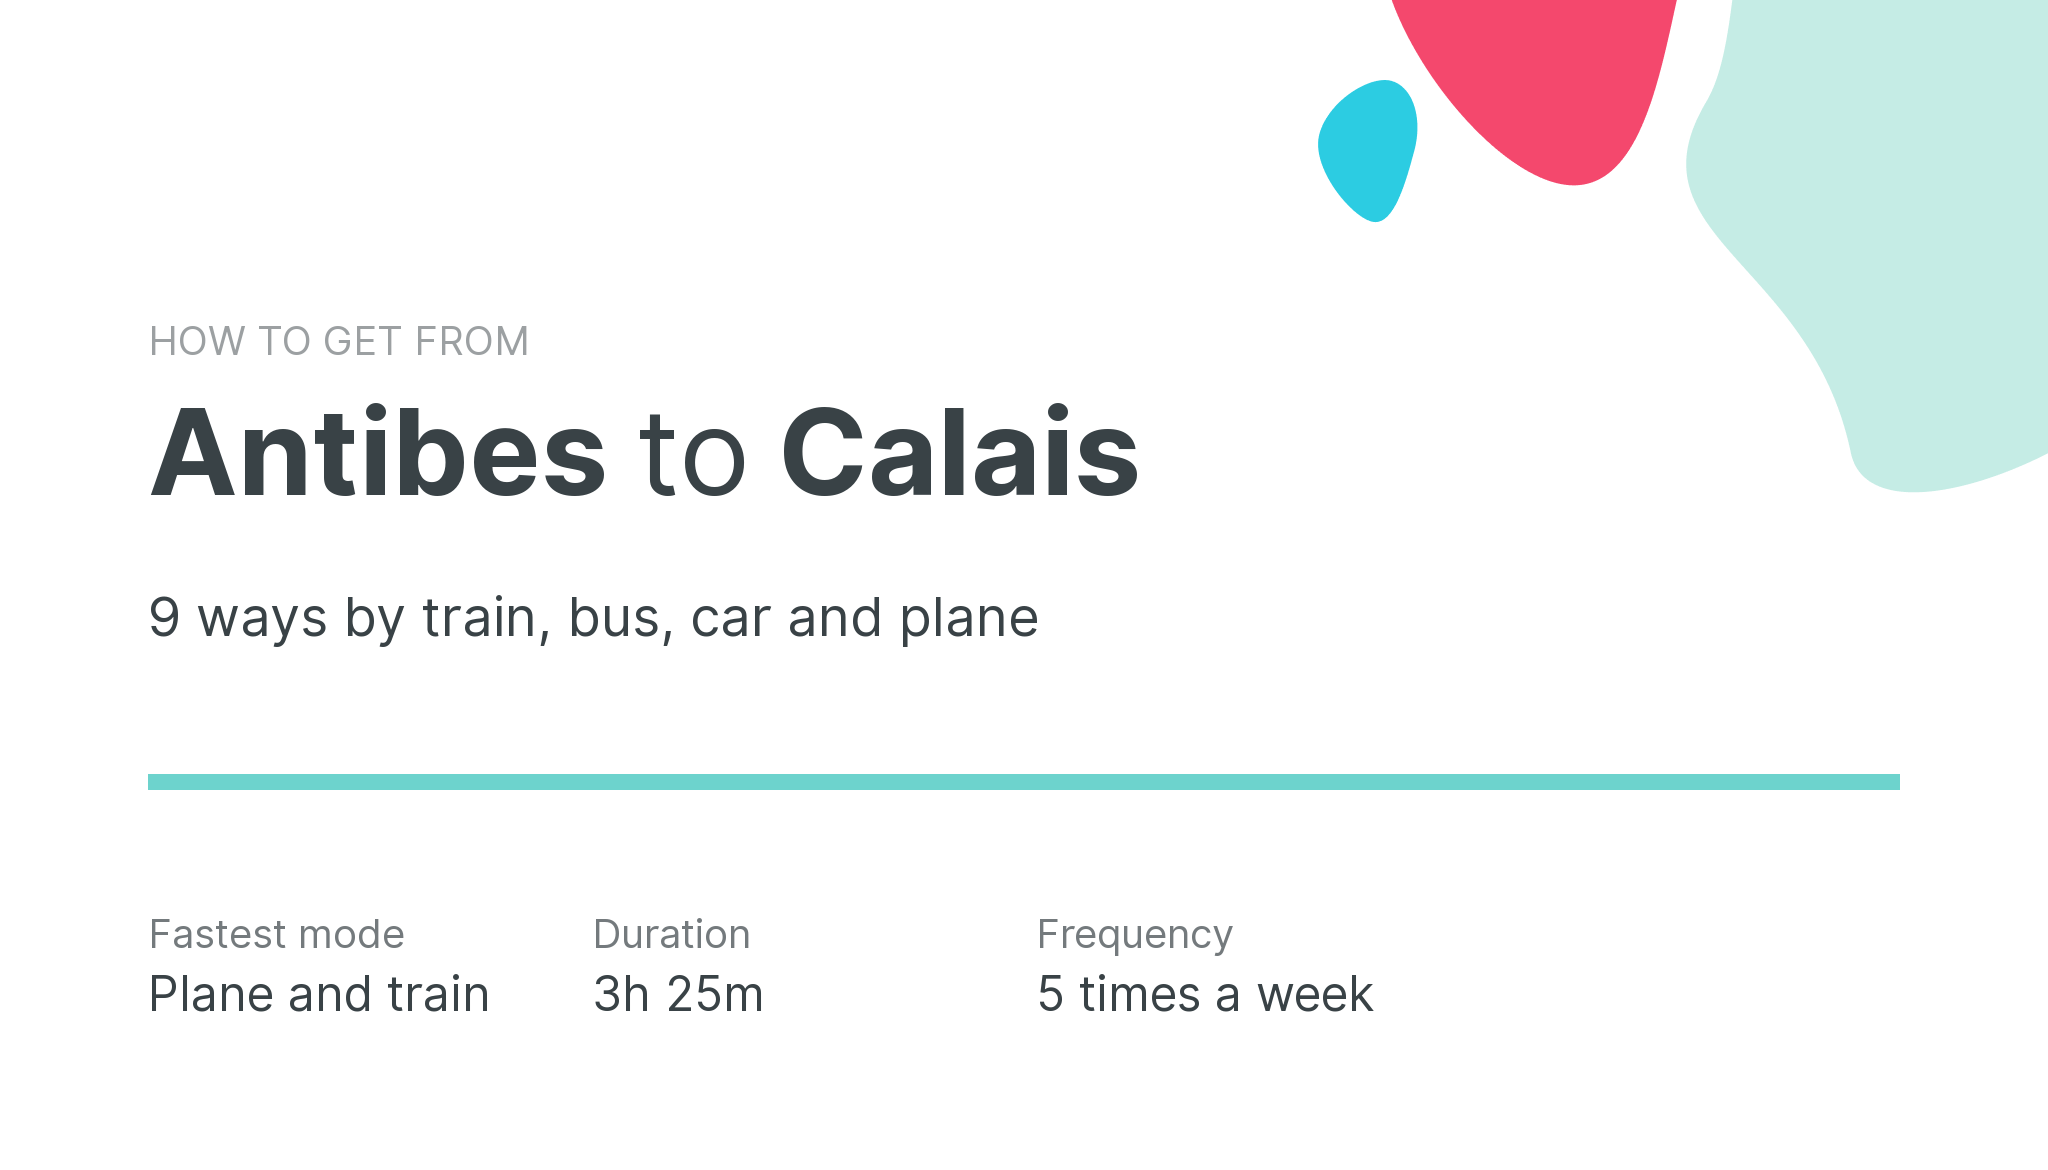 How do I get from Antibes to Calais